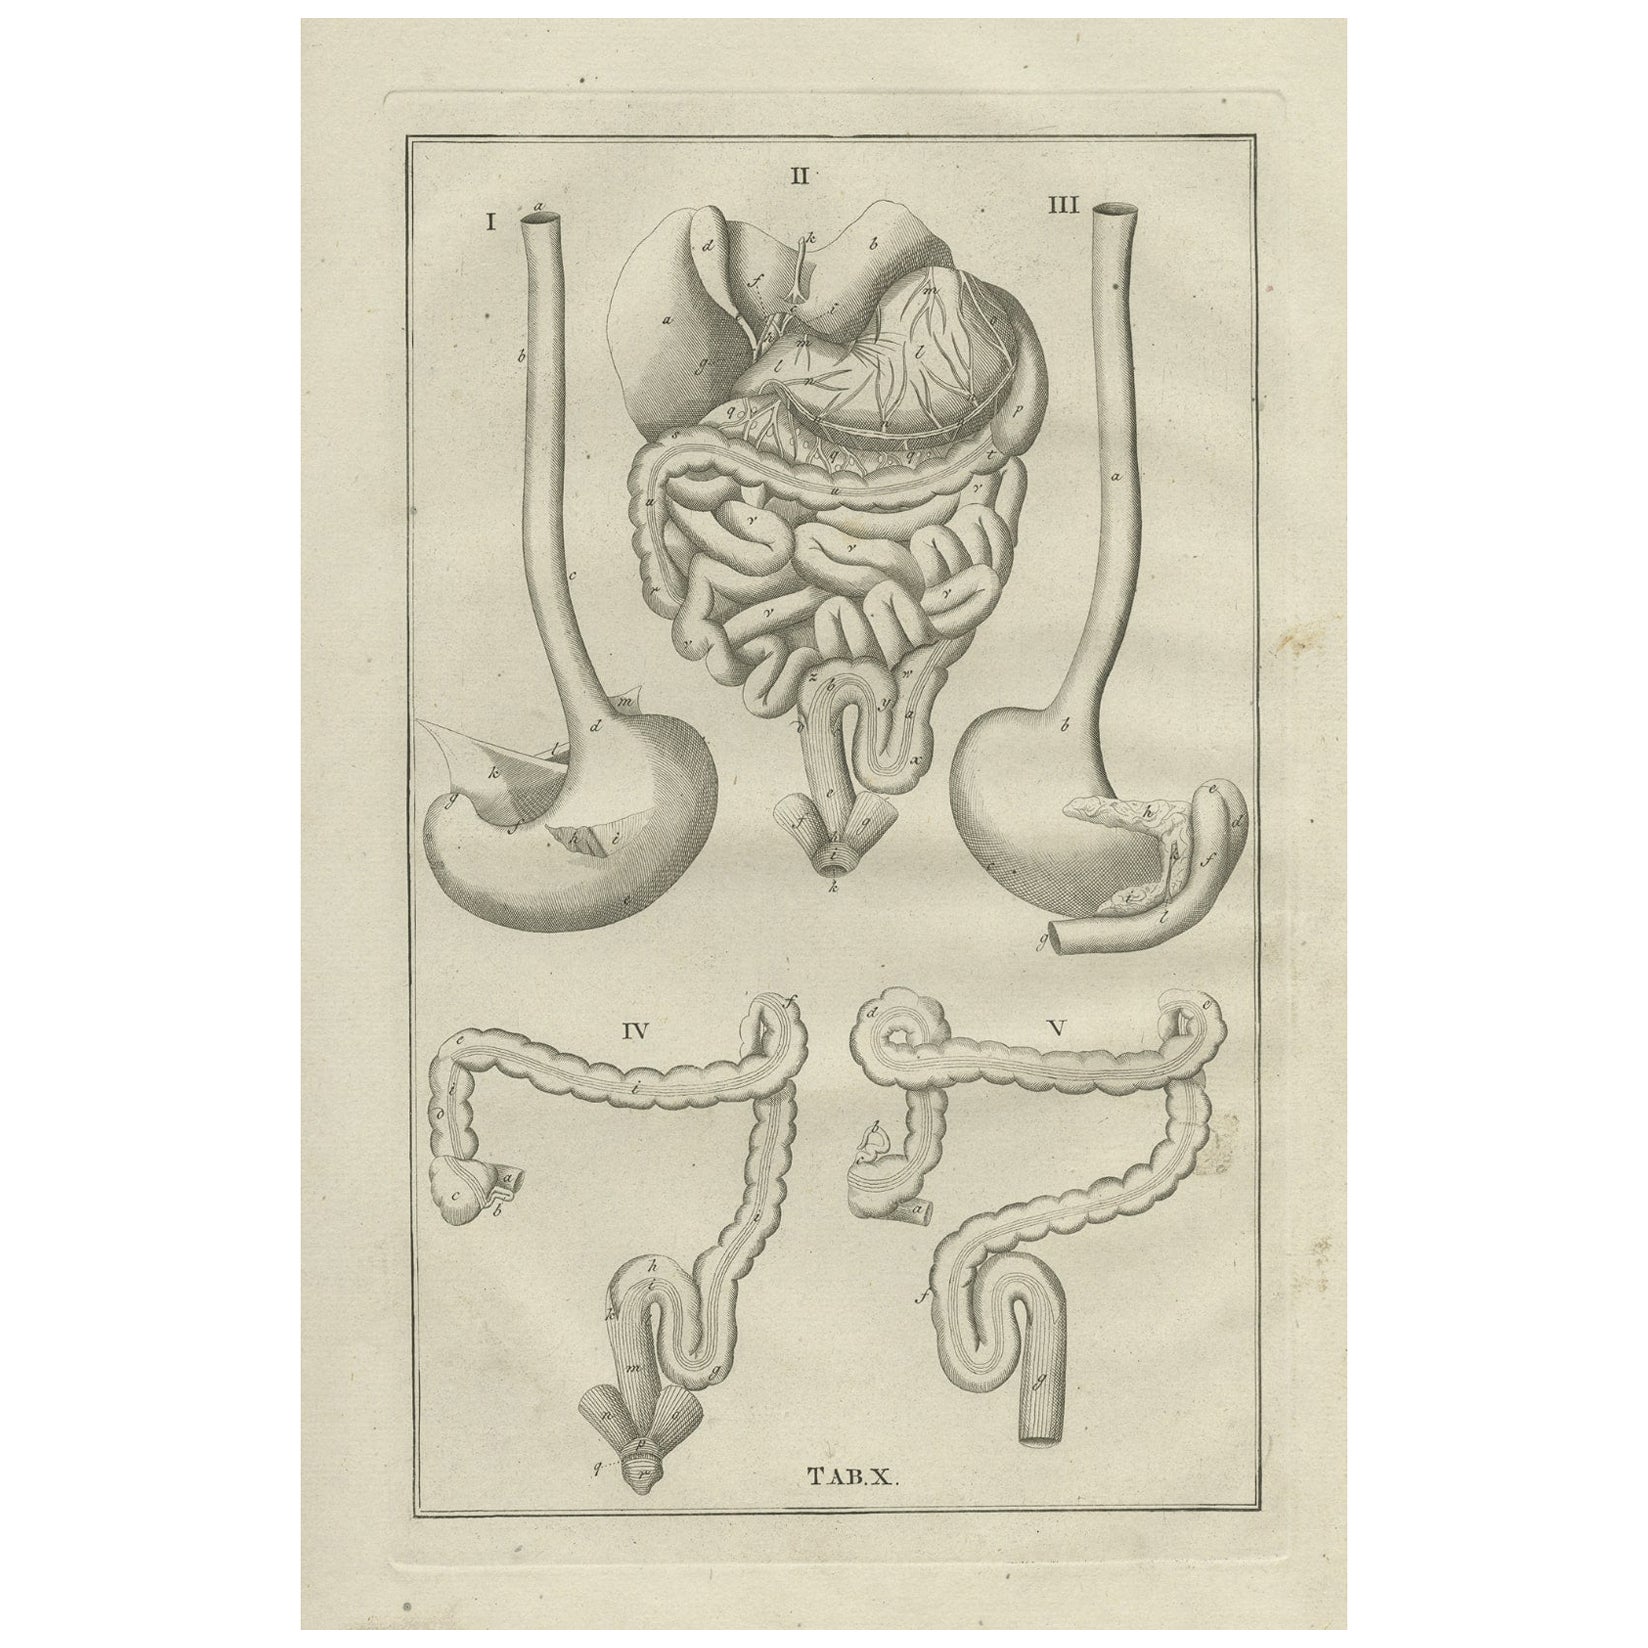 Antique Anatomy Print of the Gastrointestinal Tract, 1798